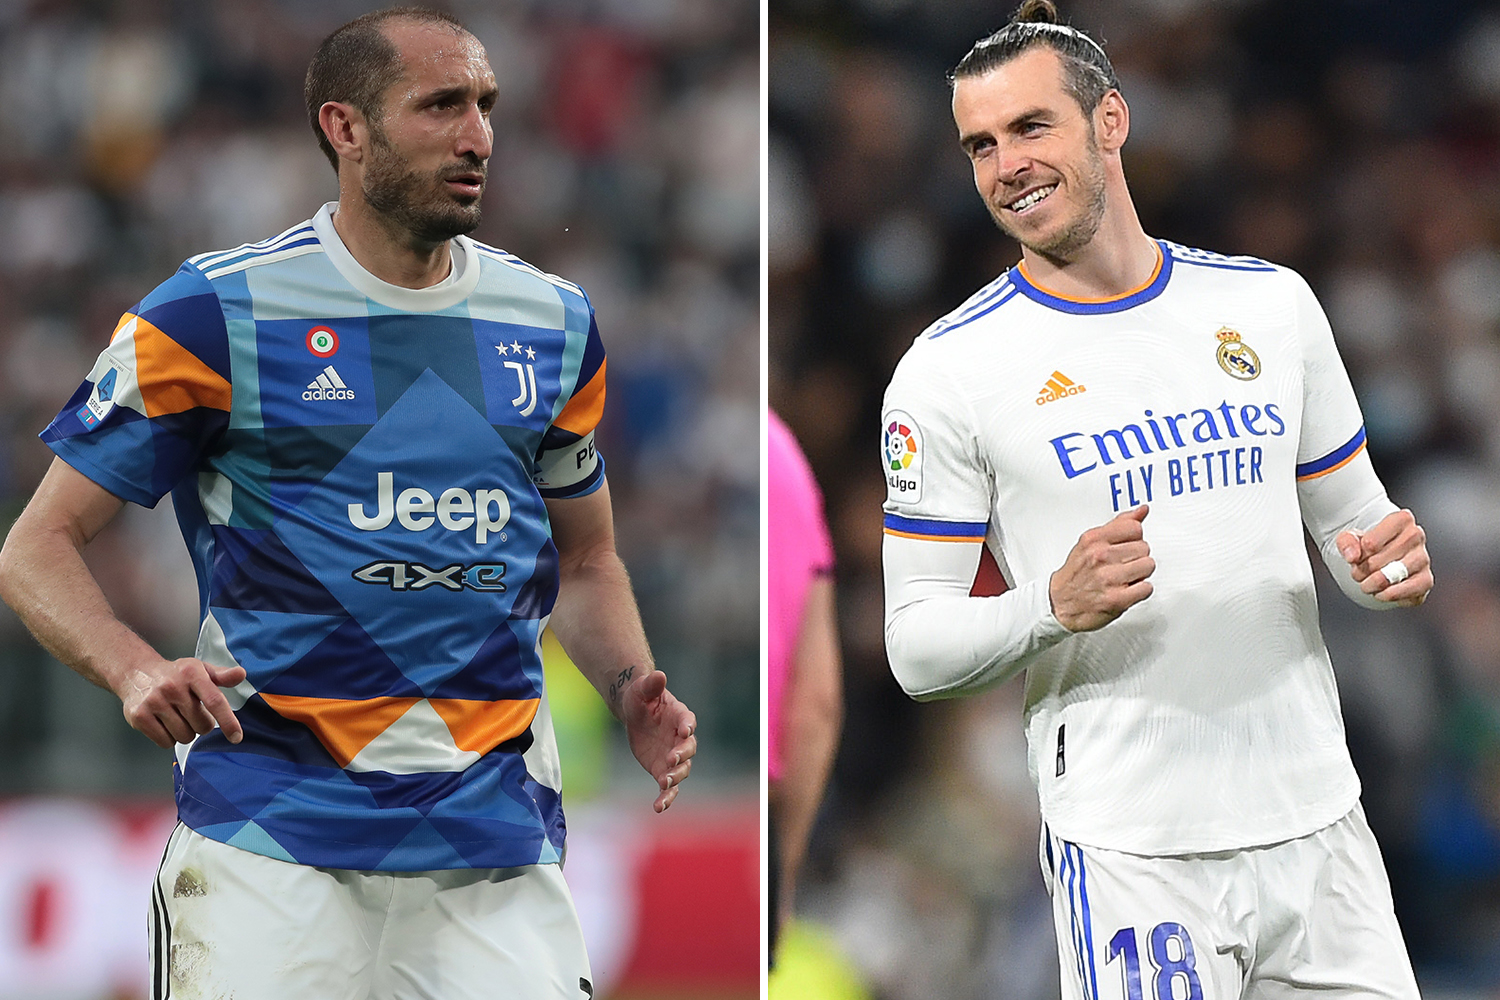 Chiellini could join Bale in quitting Europe this summer to finish career in MLS